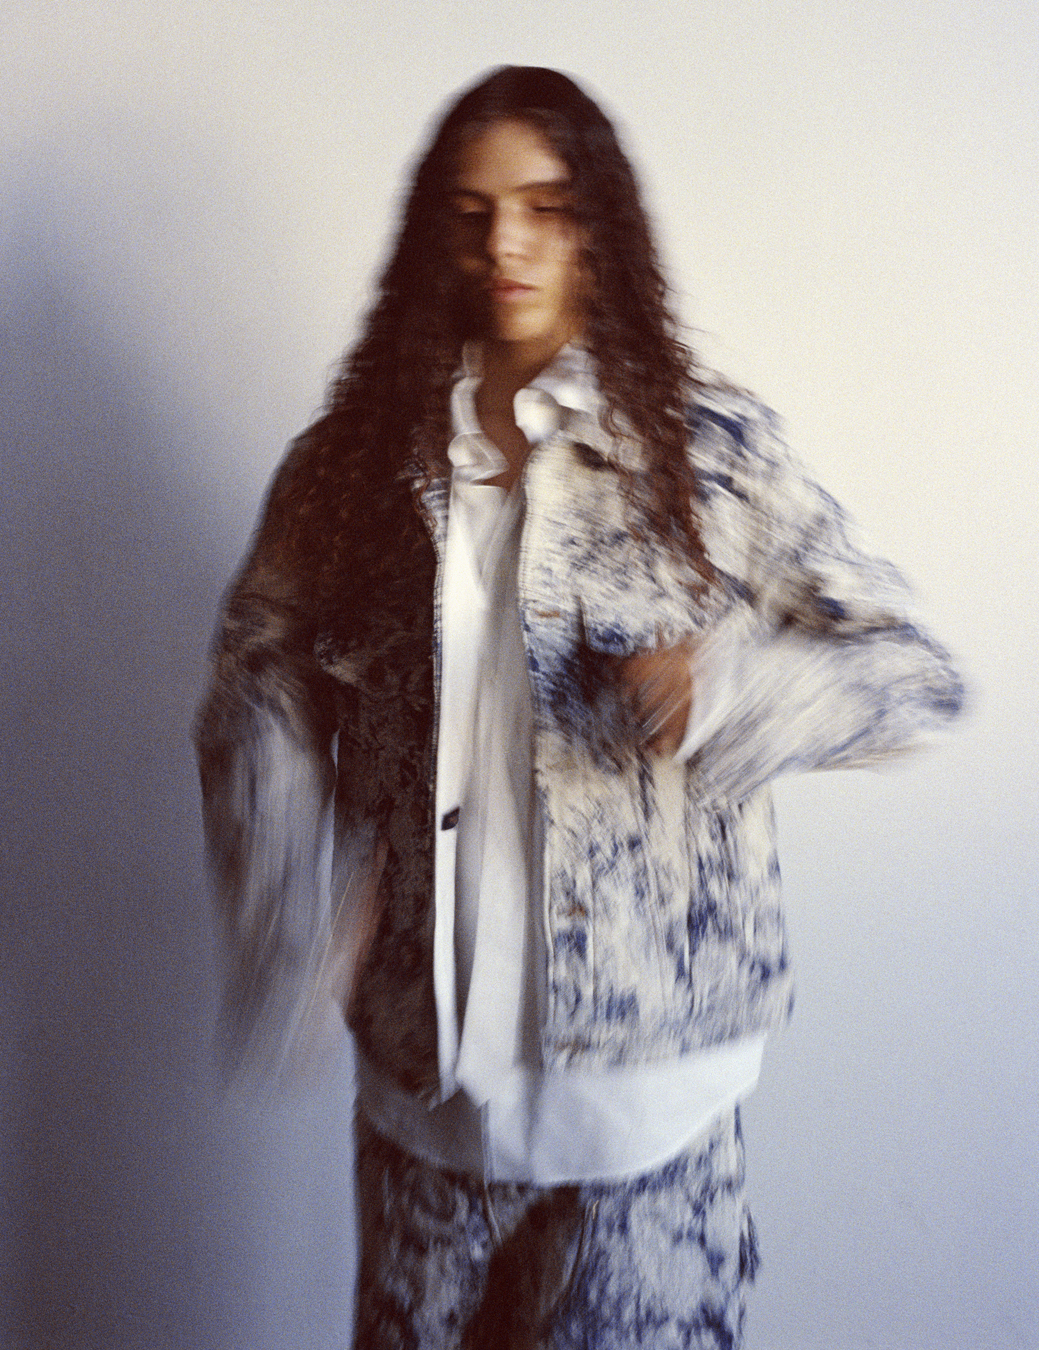 070 Shake photographed by James Brodribb  in i-D’s The Royalty Issue, no. 370, Winter 2022